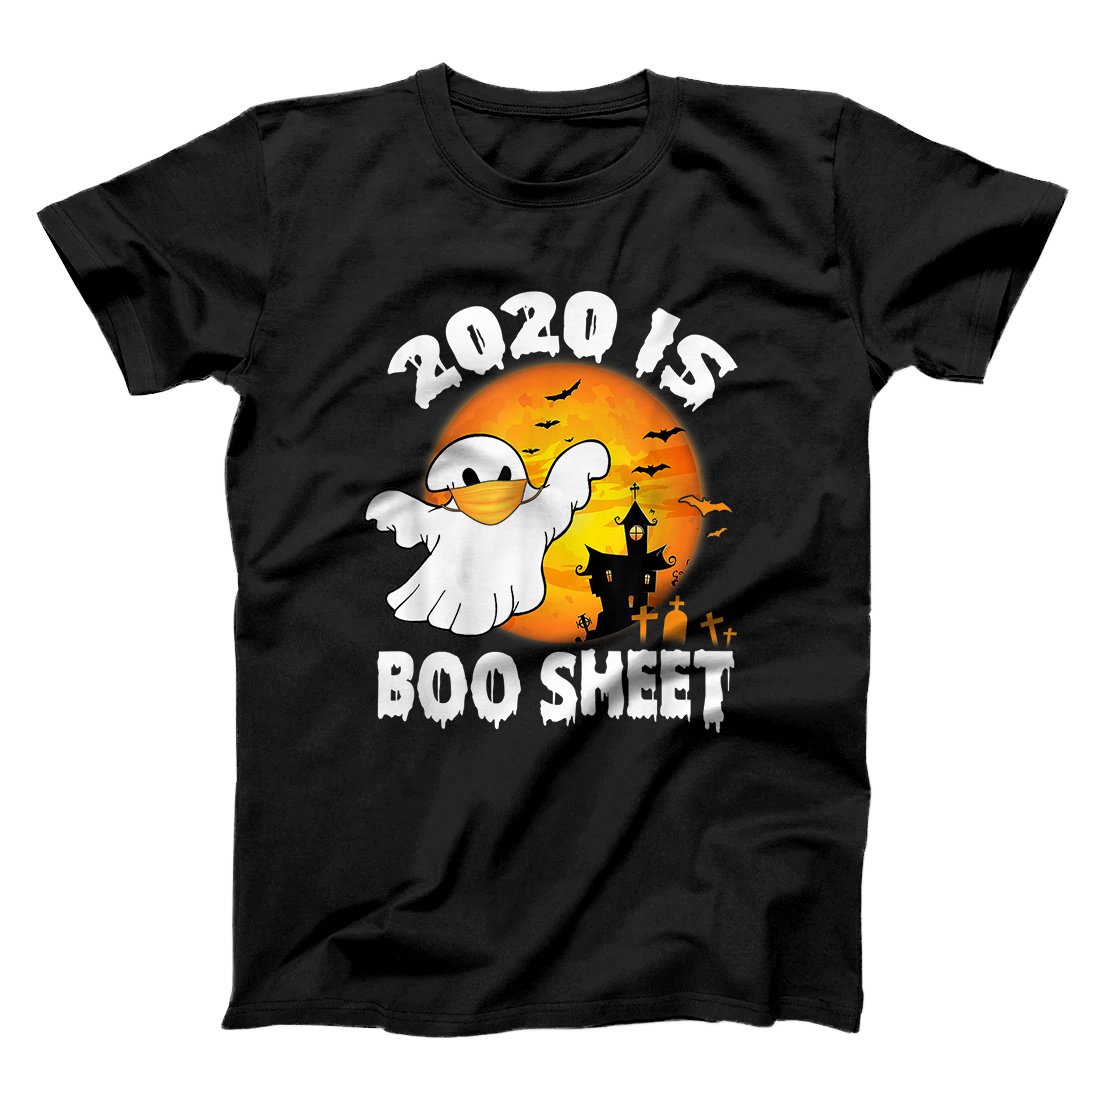 Personalized 2020 Is Boo Sheet Halloween Costume Ghost Wear Mask Vintage T-Shirt